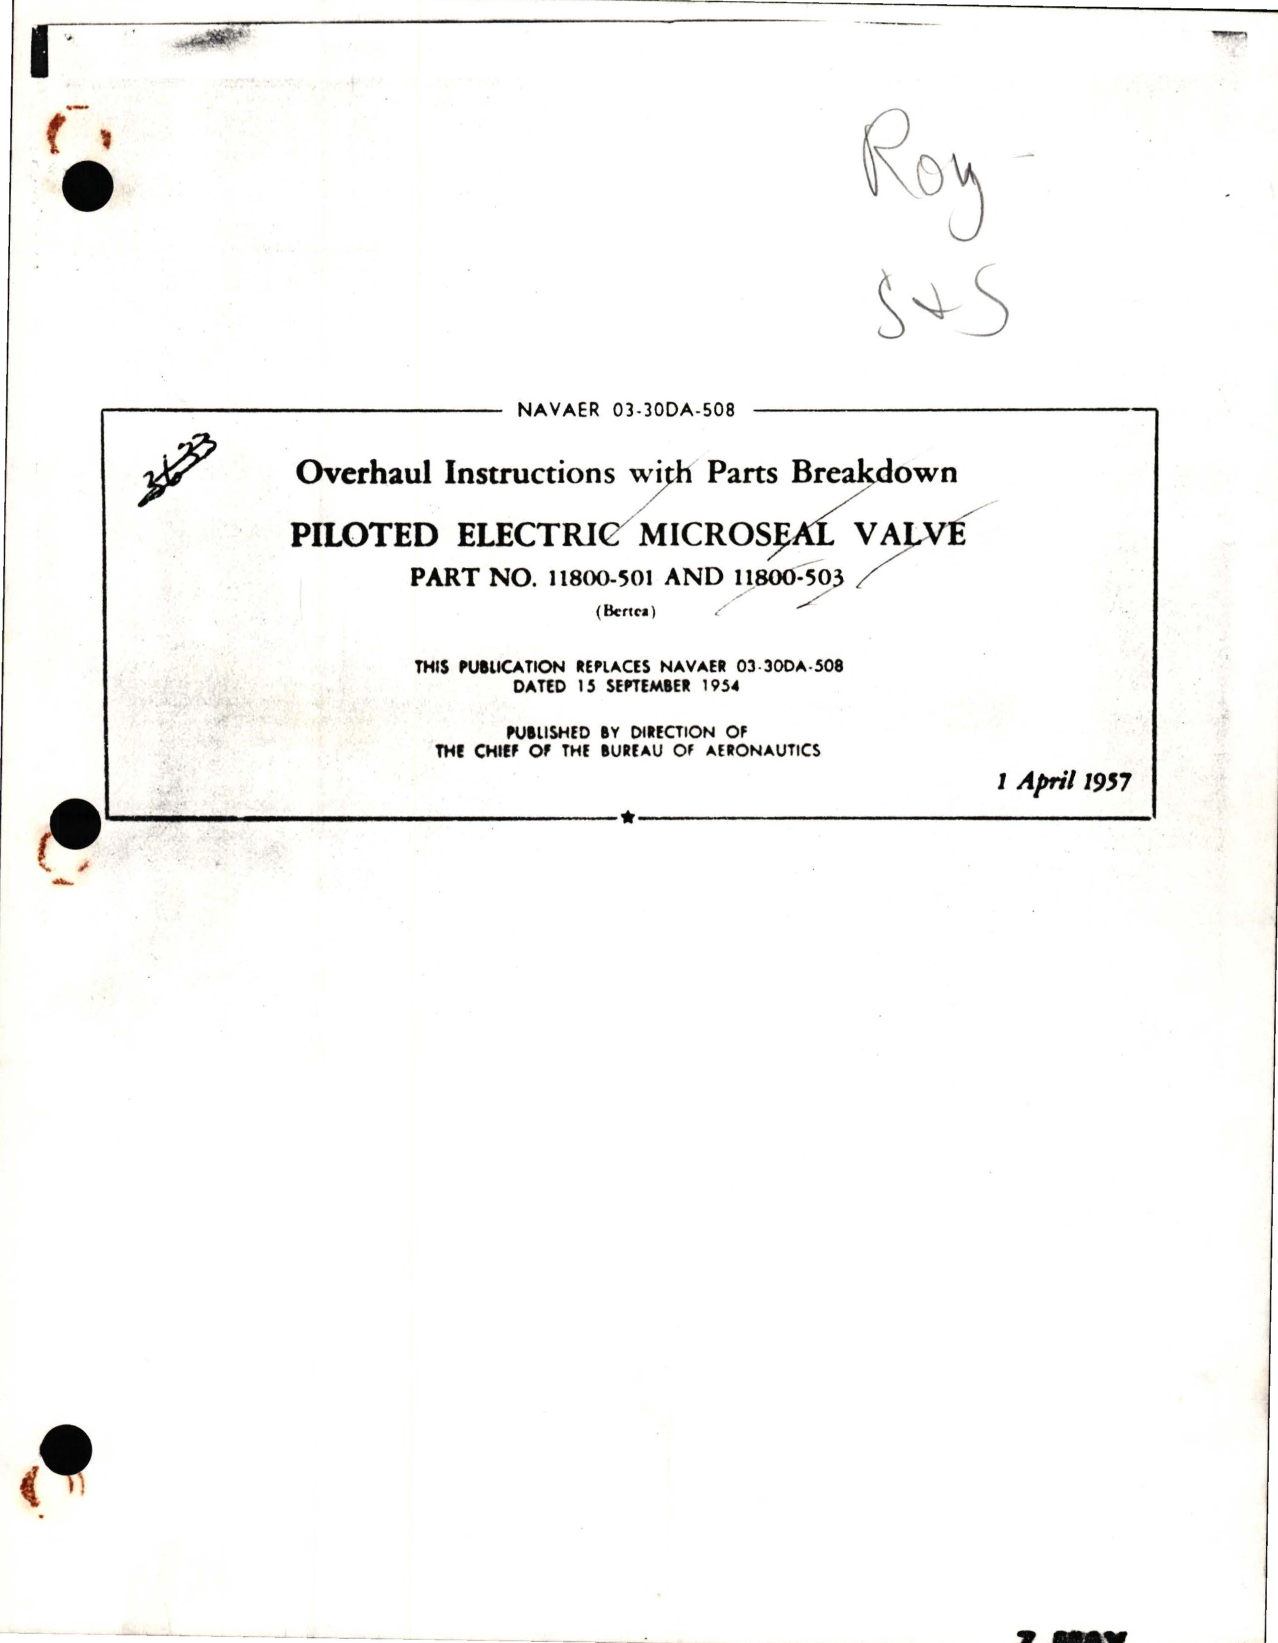 Sample page 1 from AirCorps Library document: Overhaul Instructions with Parts Breakdown for Piloted Electric Microseal Valve - Part 11800-501, 112800-503